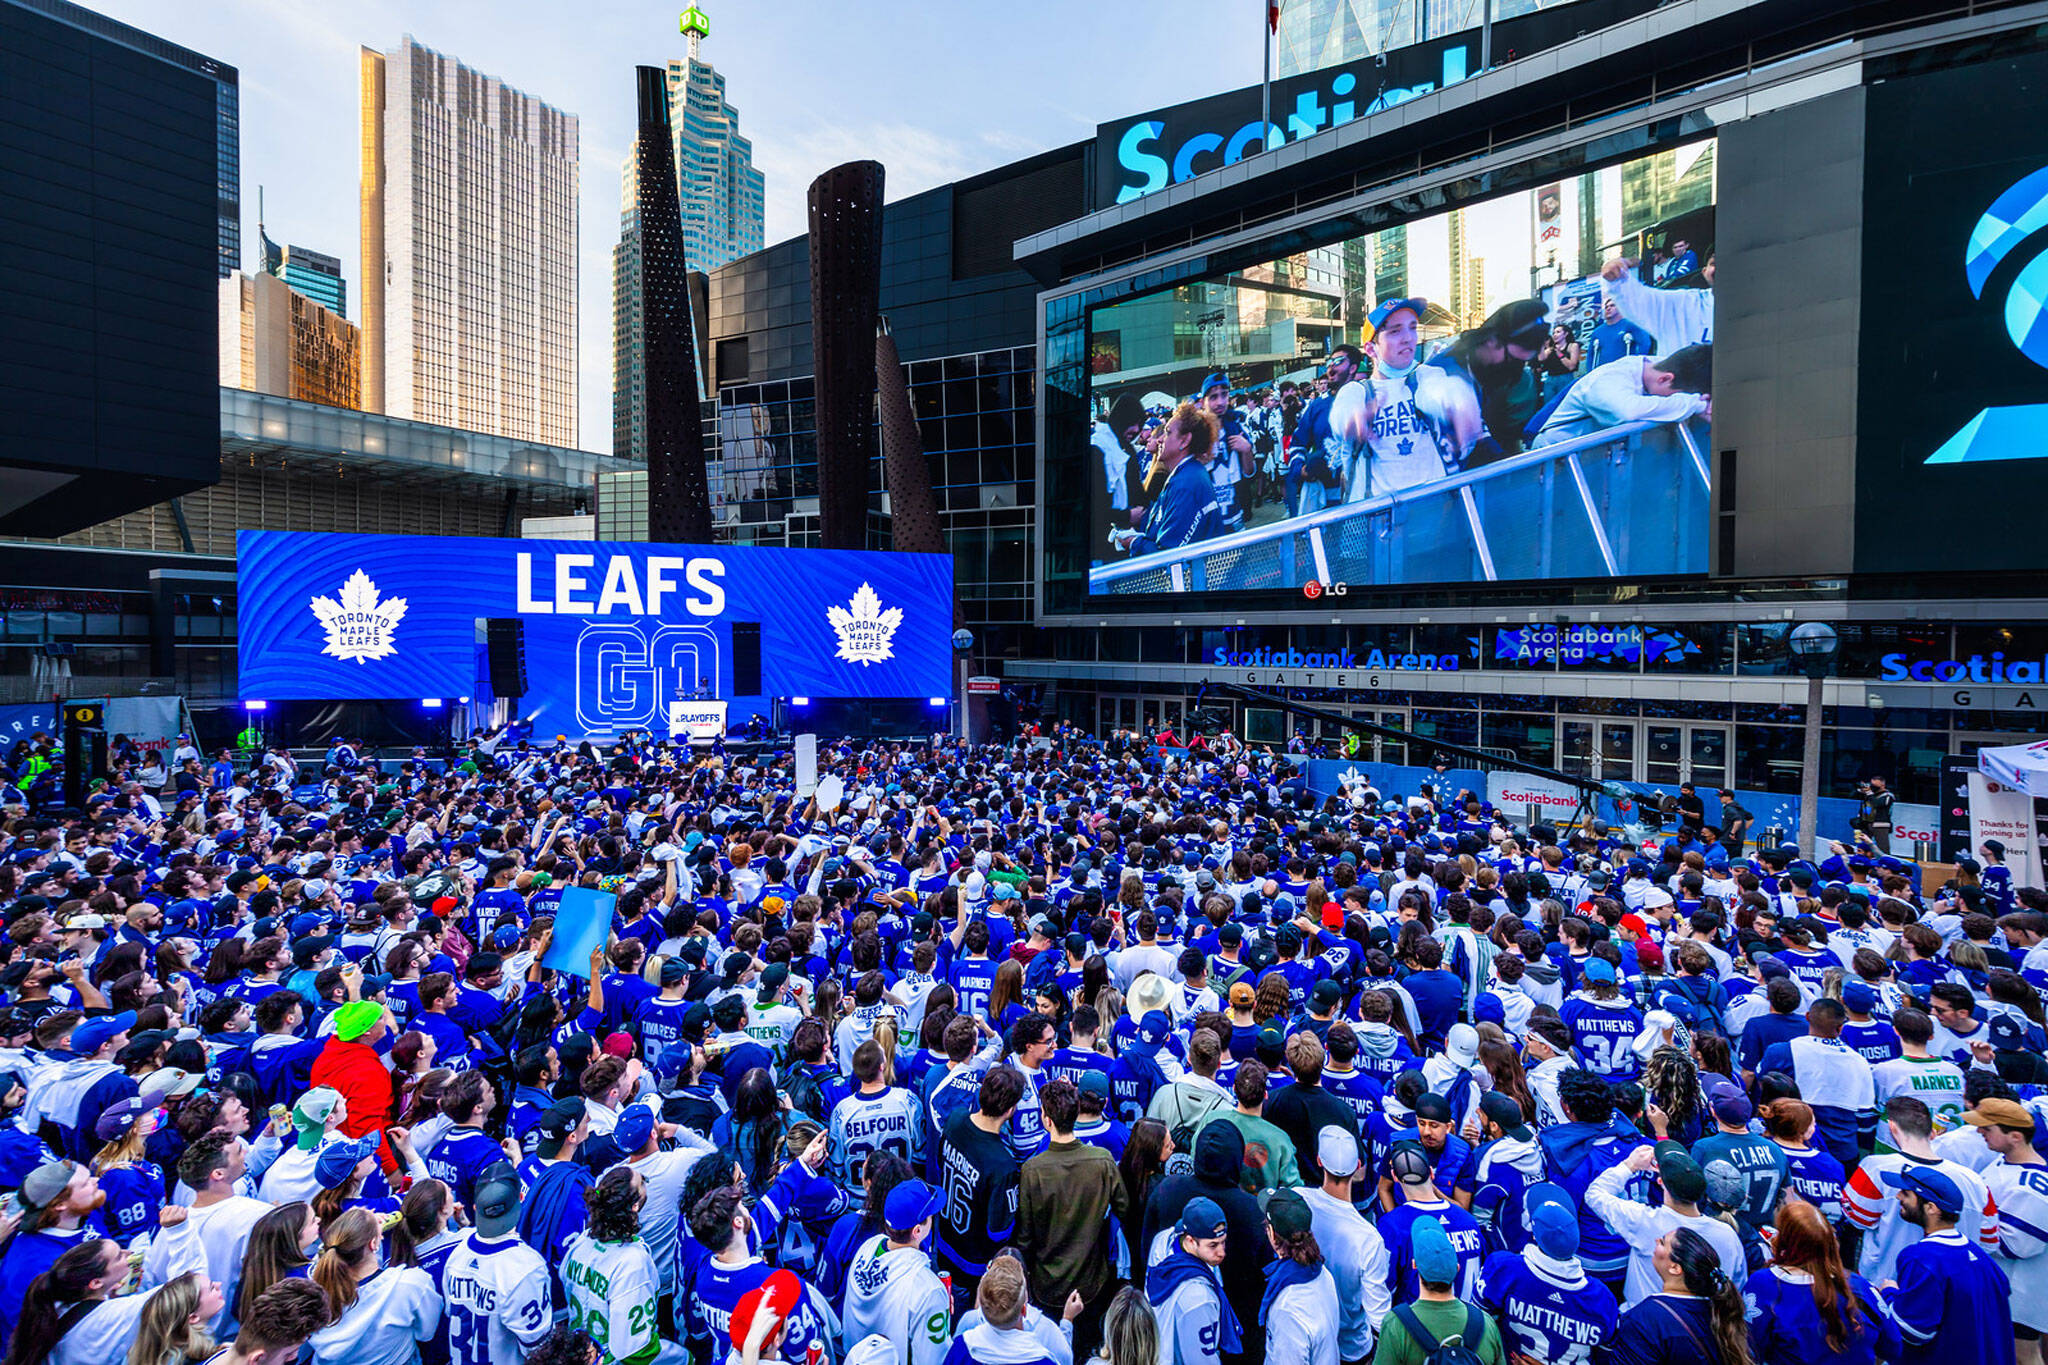 Tuesday marked the first game involving the @mapleleafs to feature